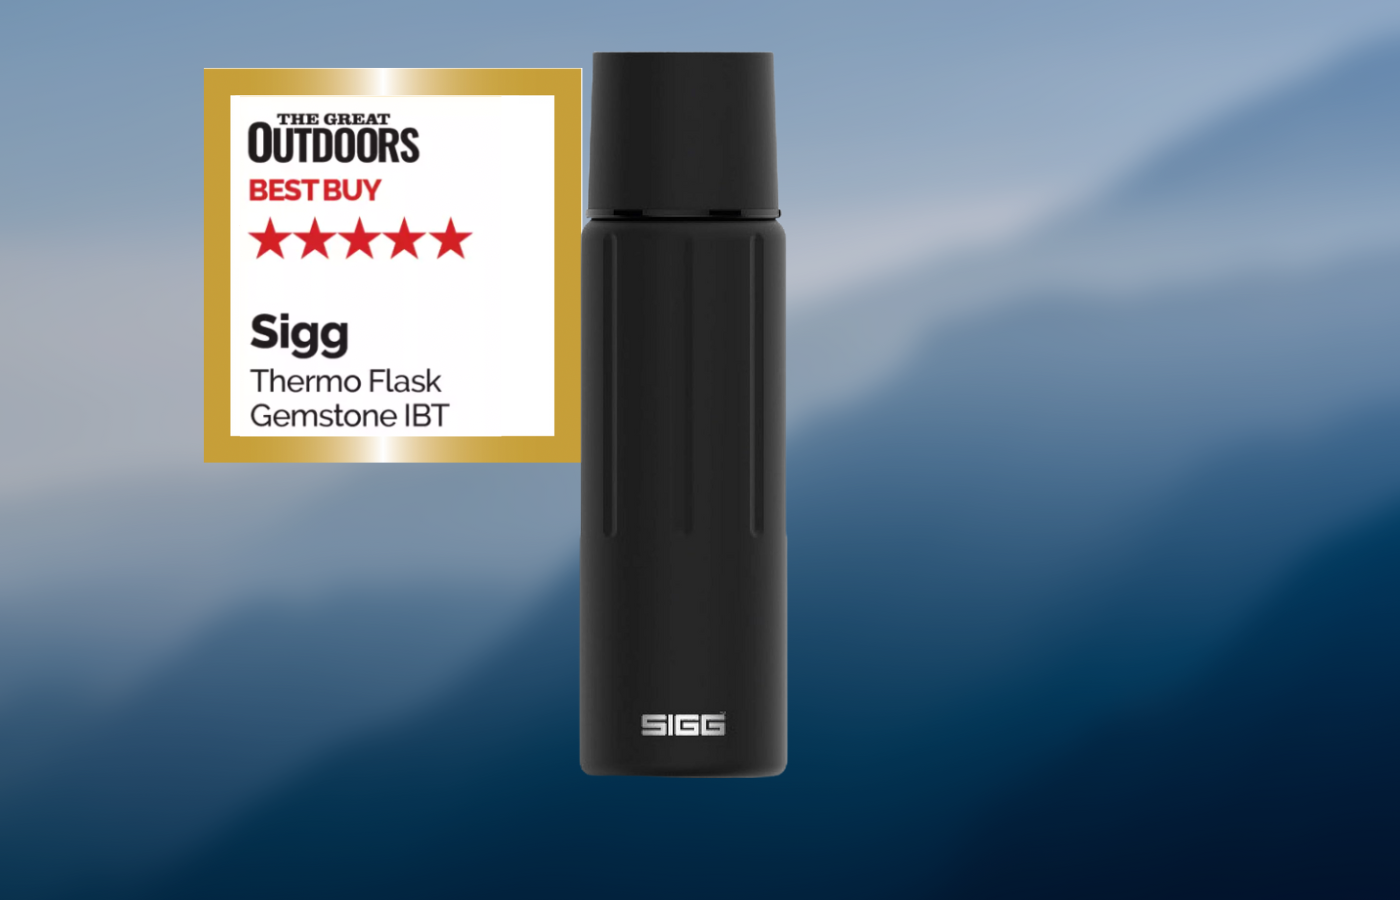 Sigg Thermo Flask Gemstone IBT Review